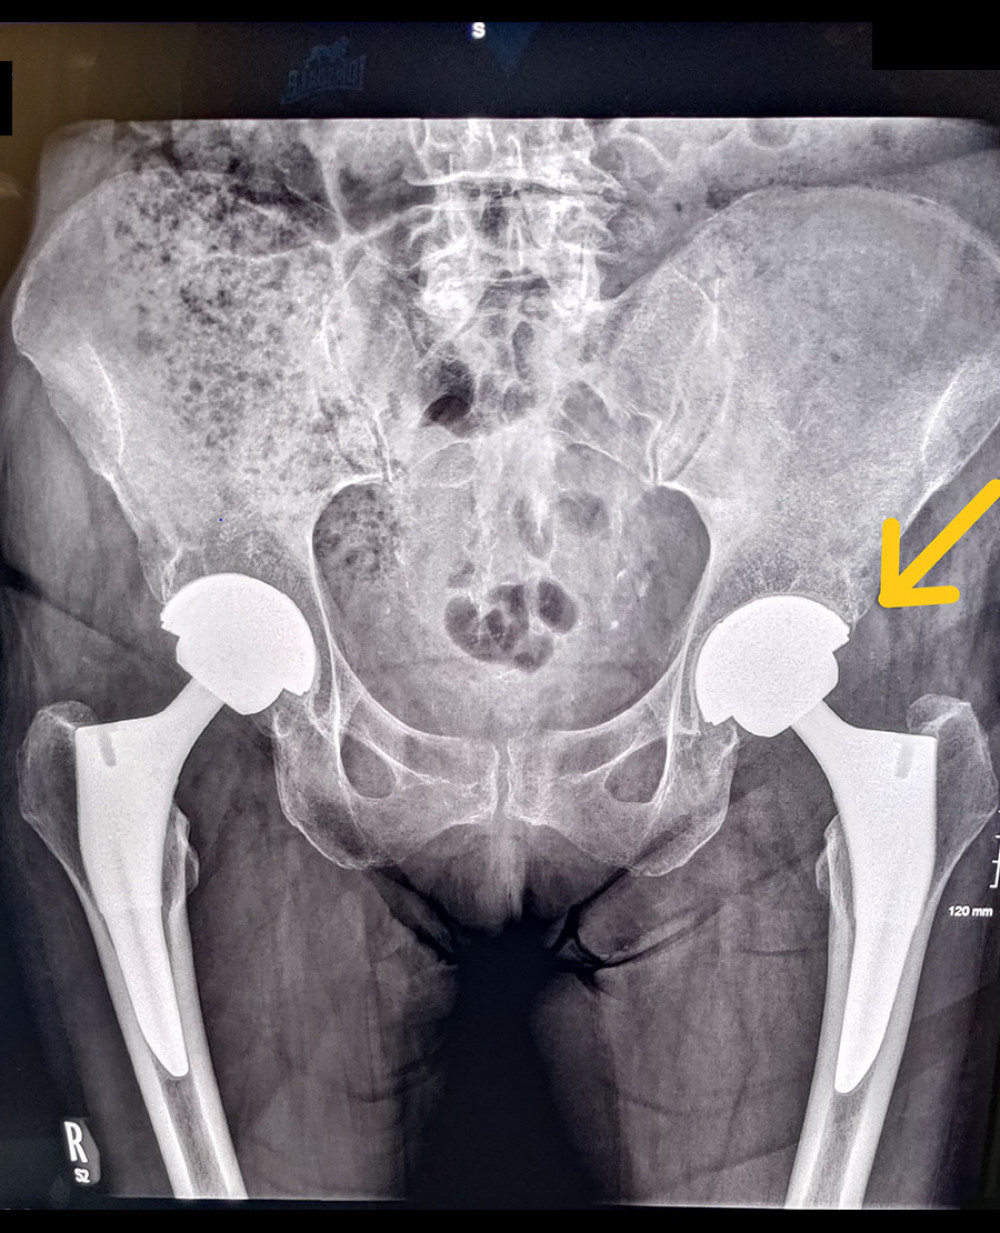 X-ray of day 1 after primary total hip replacement with a ceramic-on-ceramic bearing.